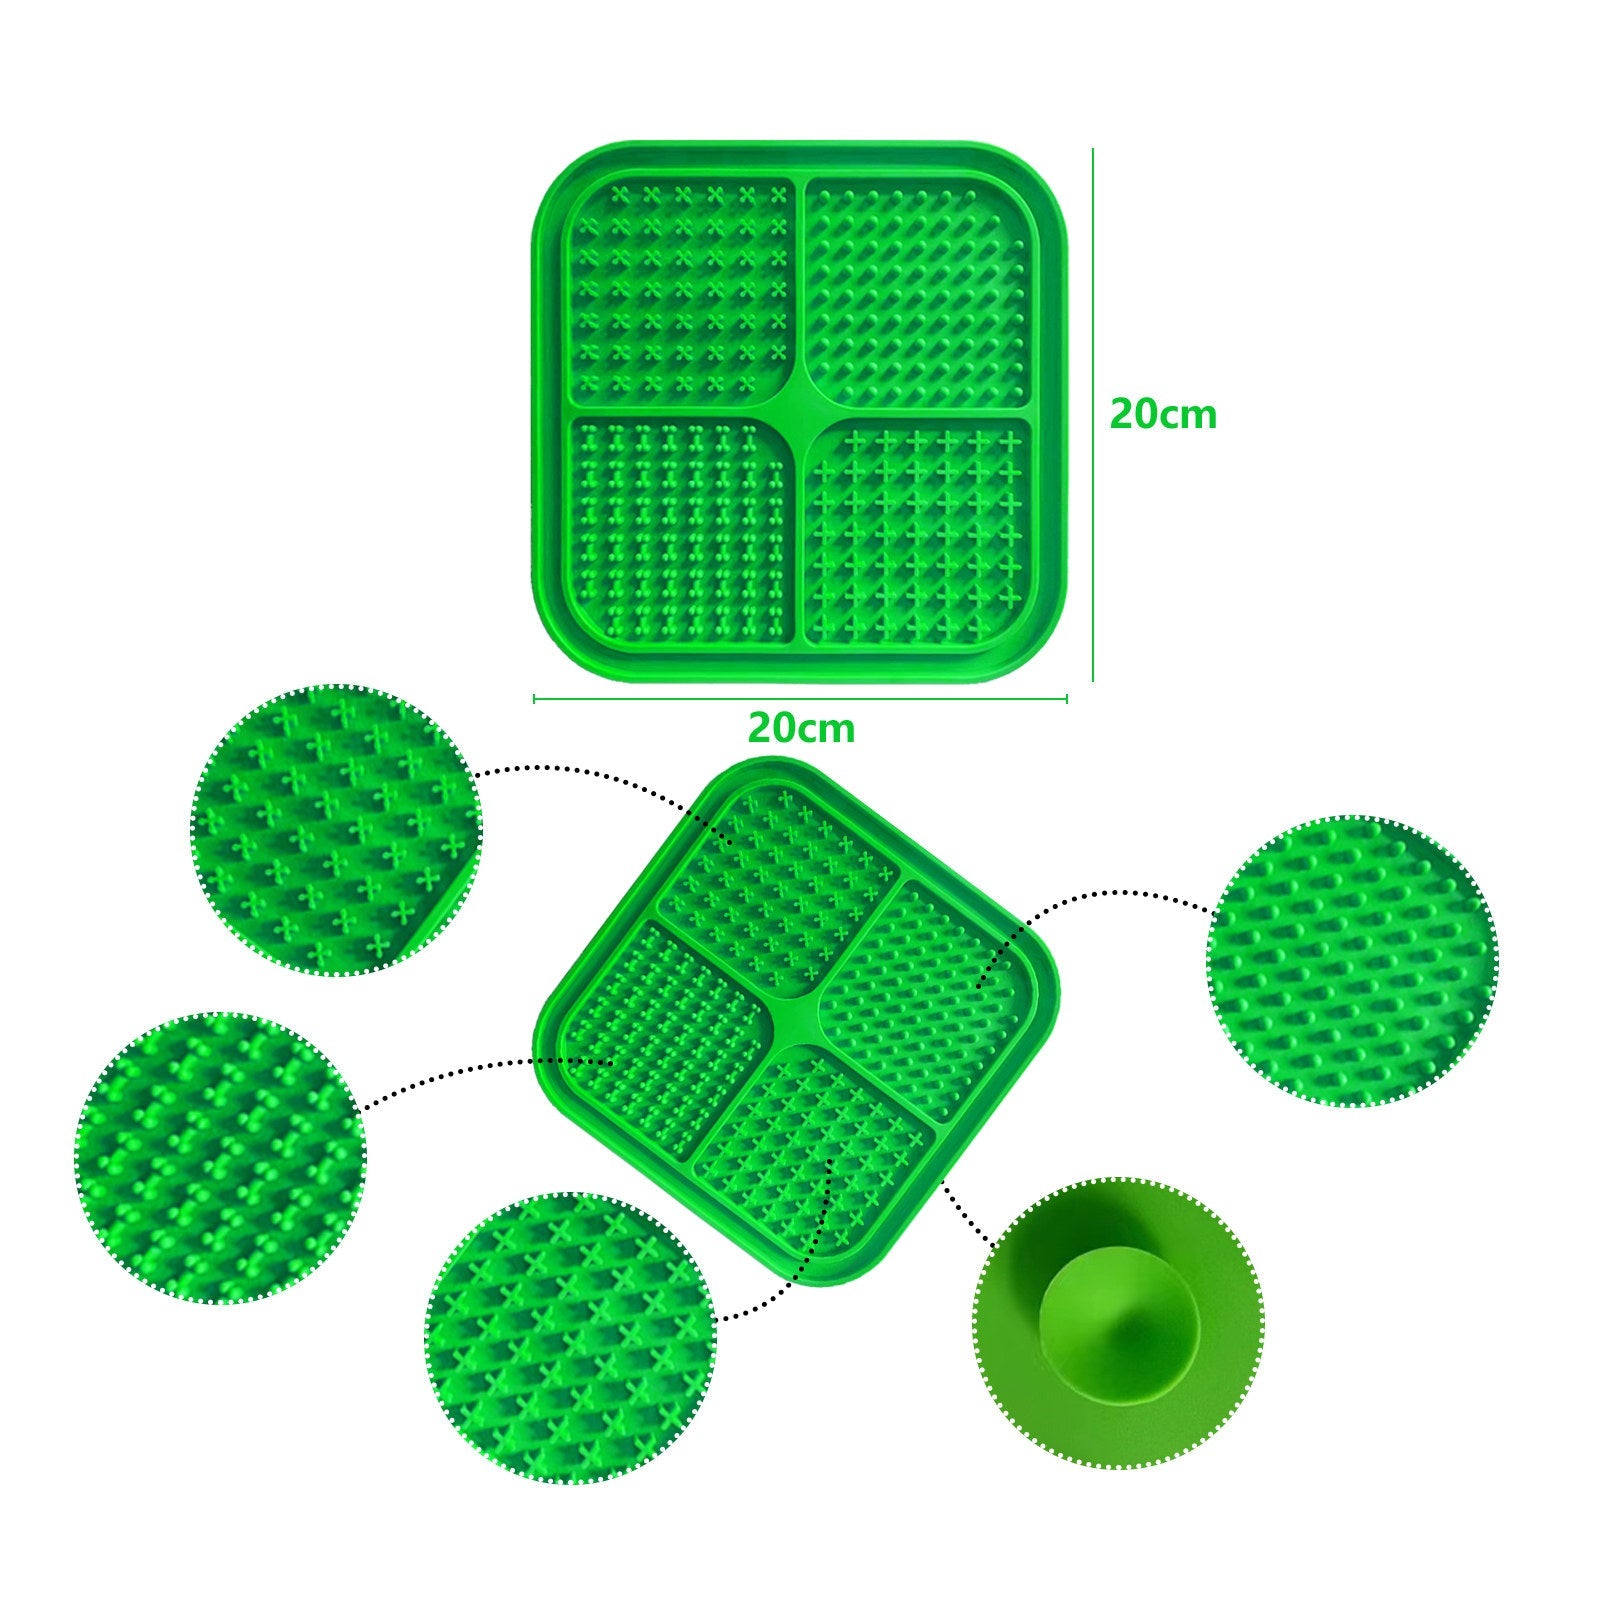 Pawfriends 4in1 Silicone Pet Lick Mat Green